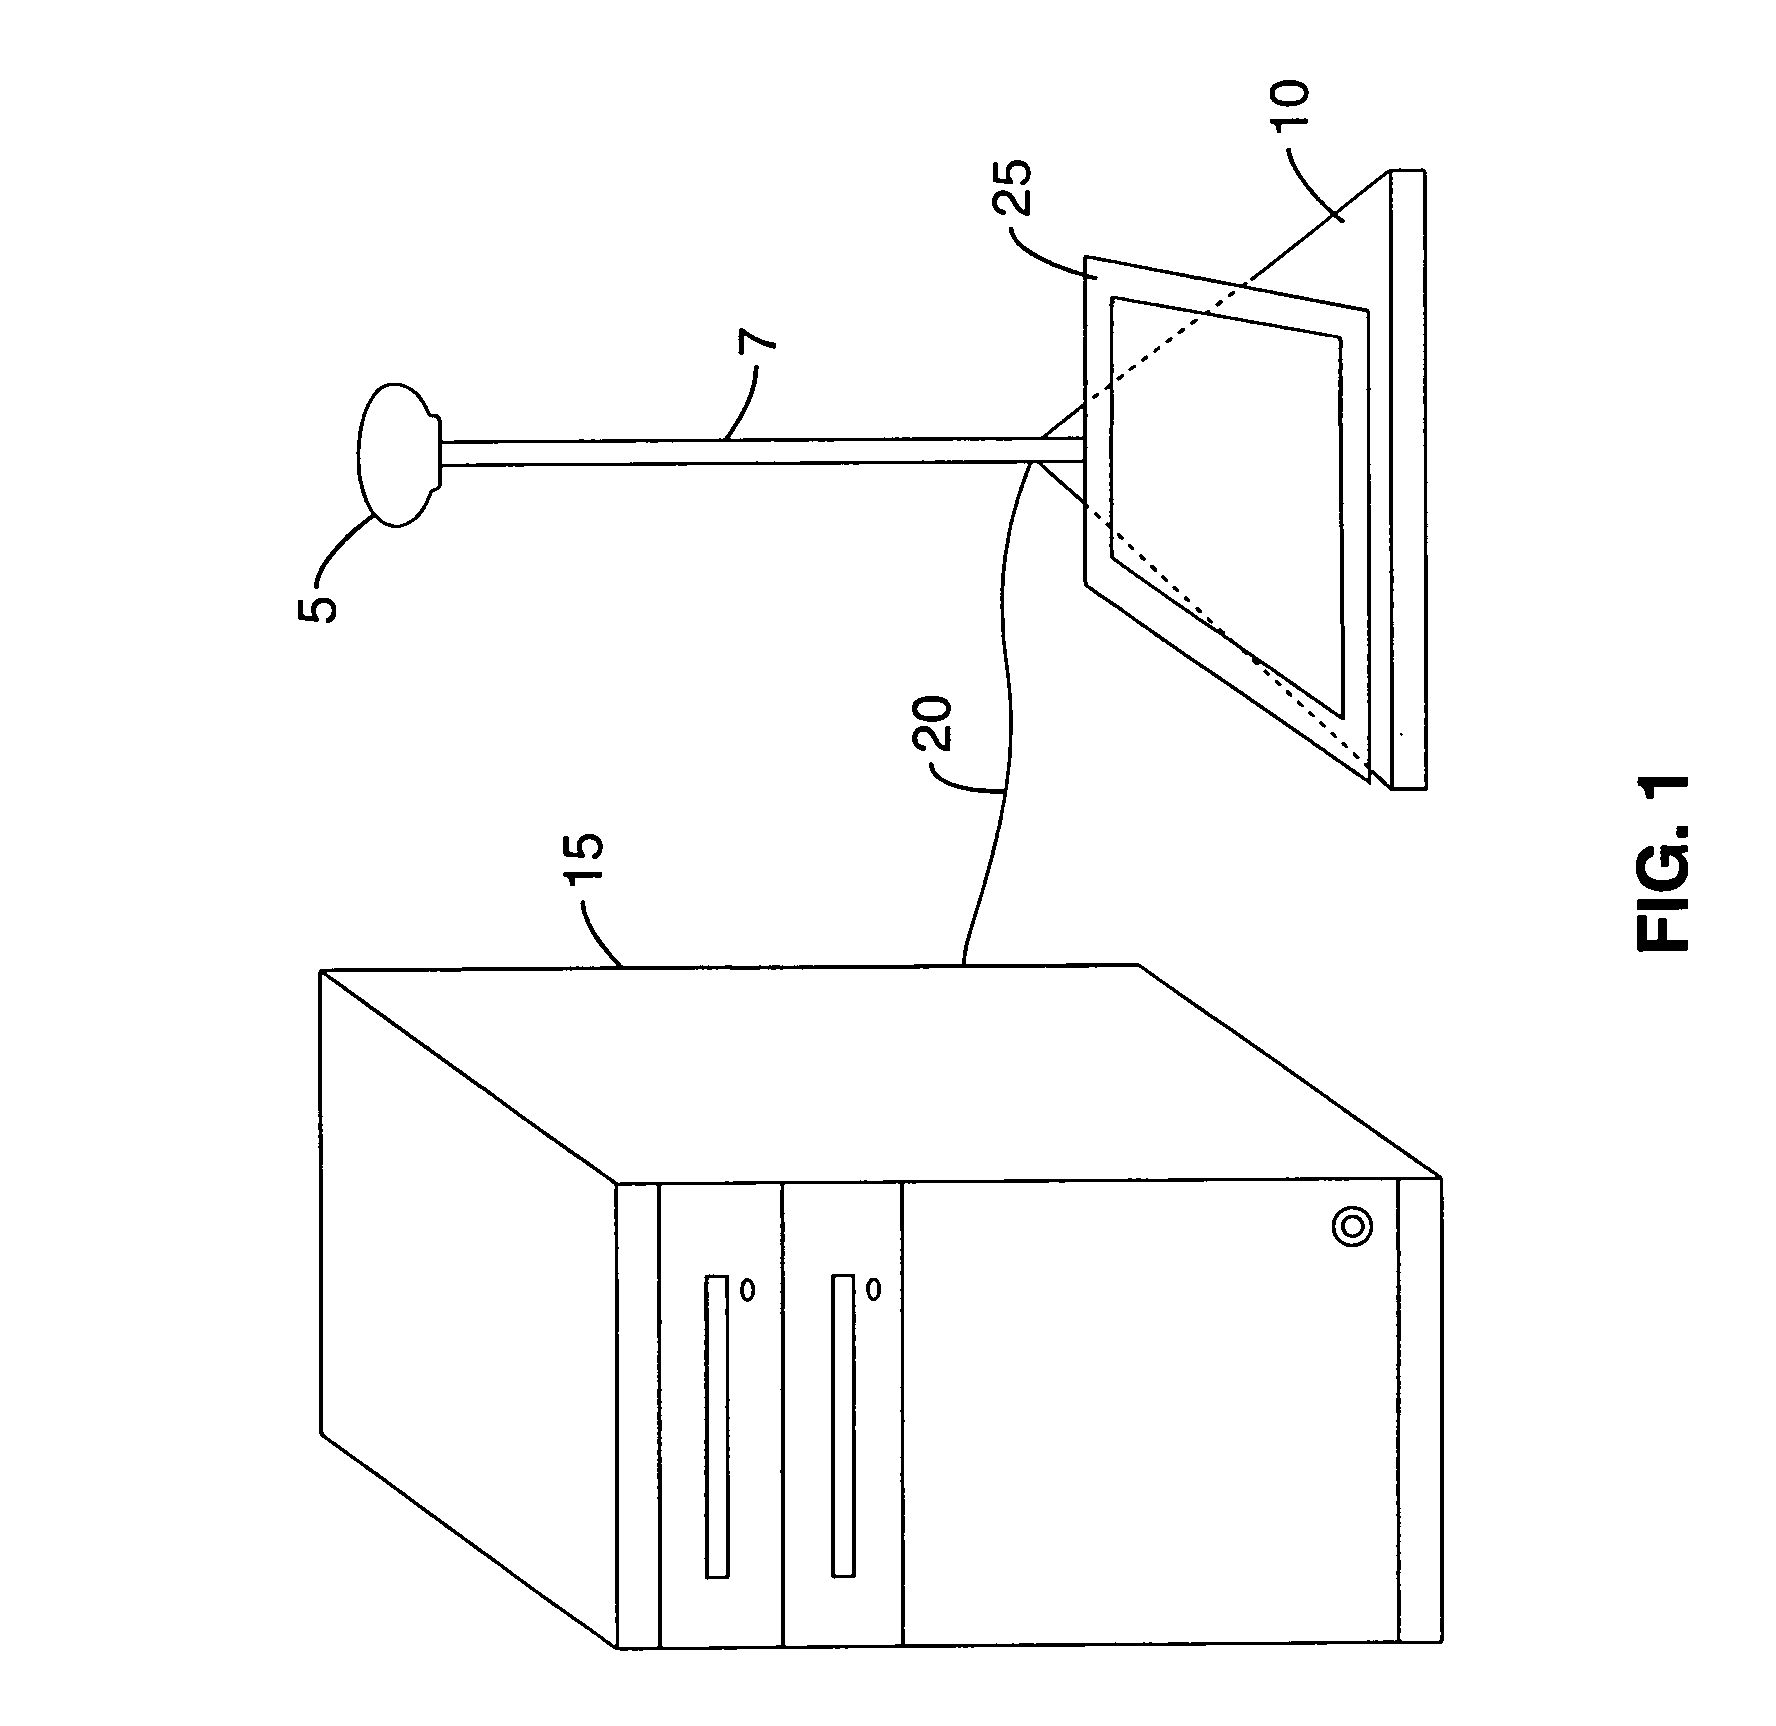 System for automatically reading a response form using a digital camera